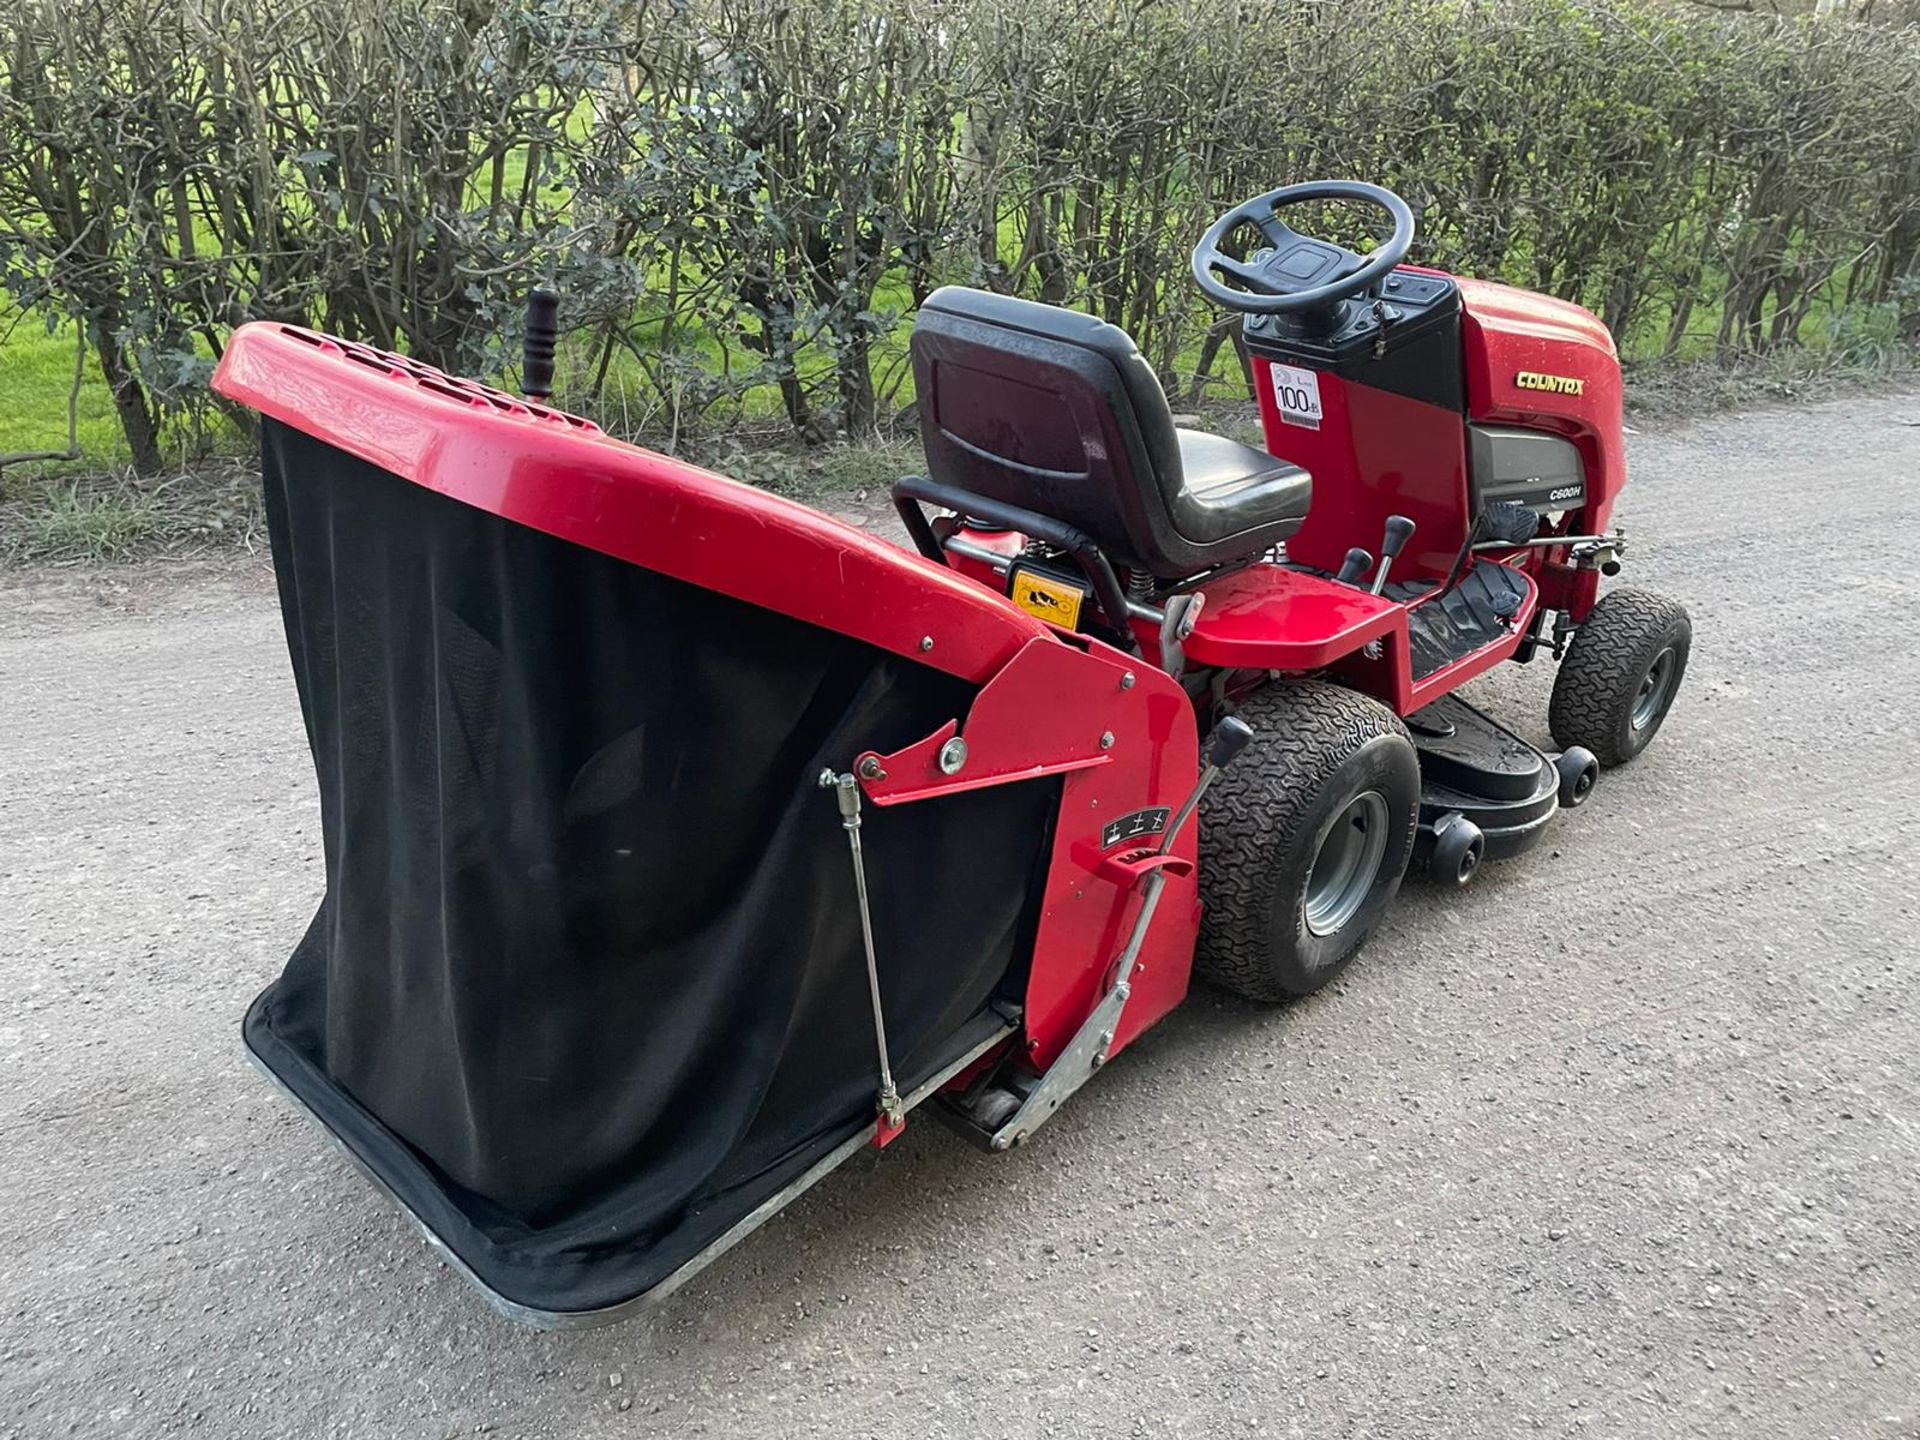 COUNTAX C600H RIDE ON MOWER WITH SCARIFIER, RUNS DRIVES AND CUTS, SWEEPER WORKS *NO VAT* - Image 4 of 6